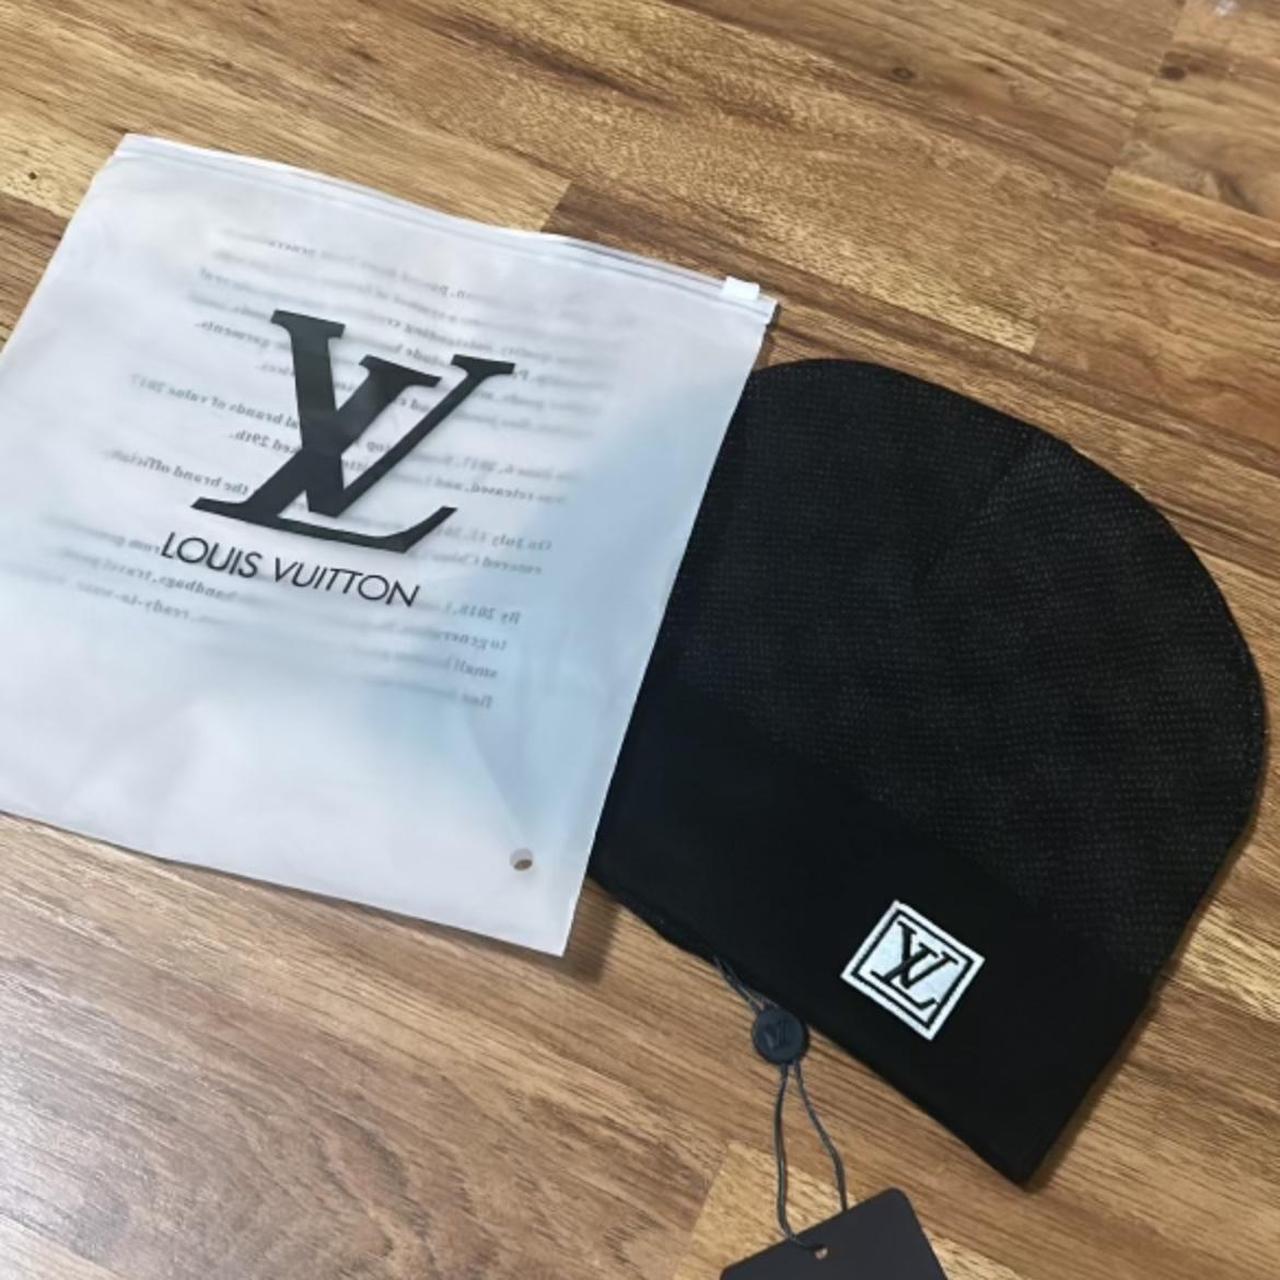 Louis Vuitton 200 years Trunk Book Limited Edition - Depop